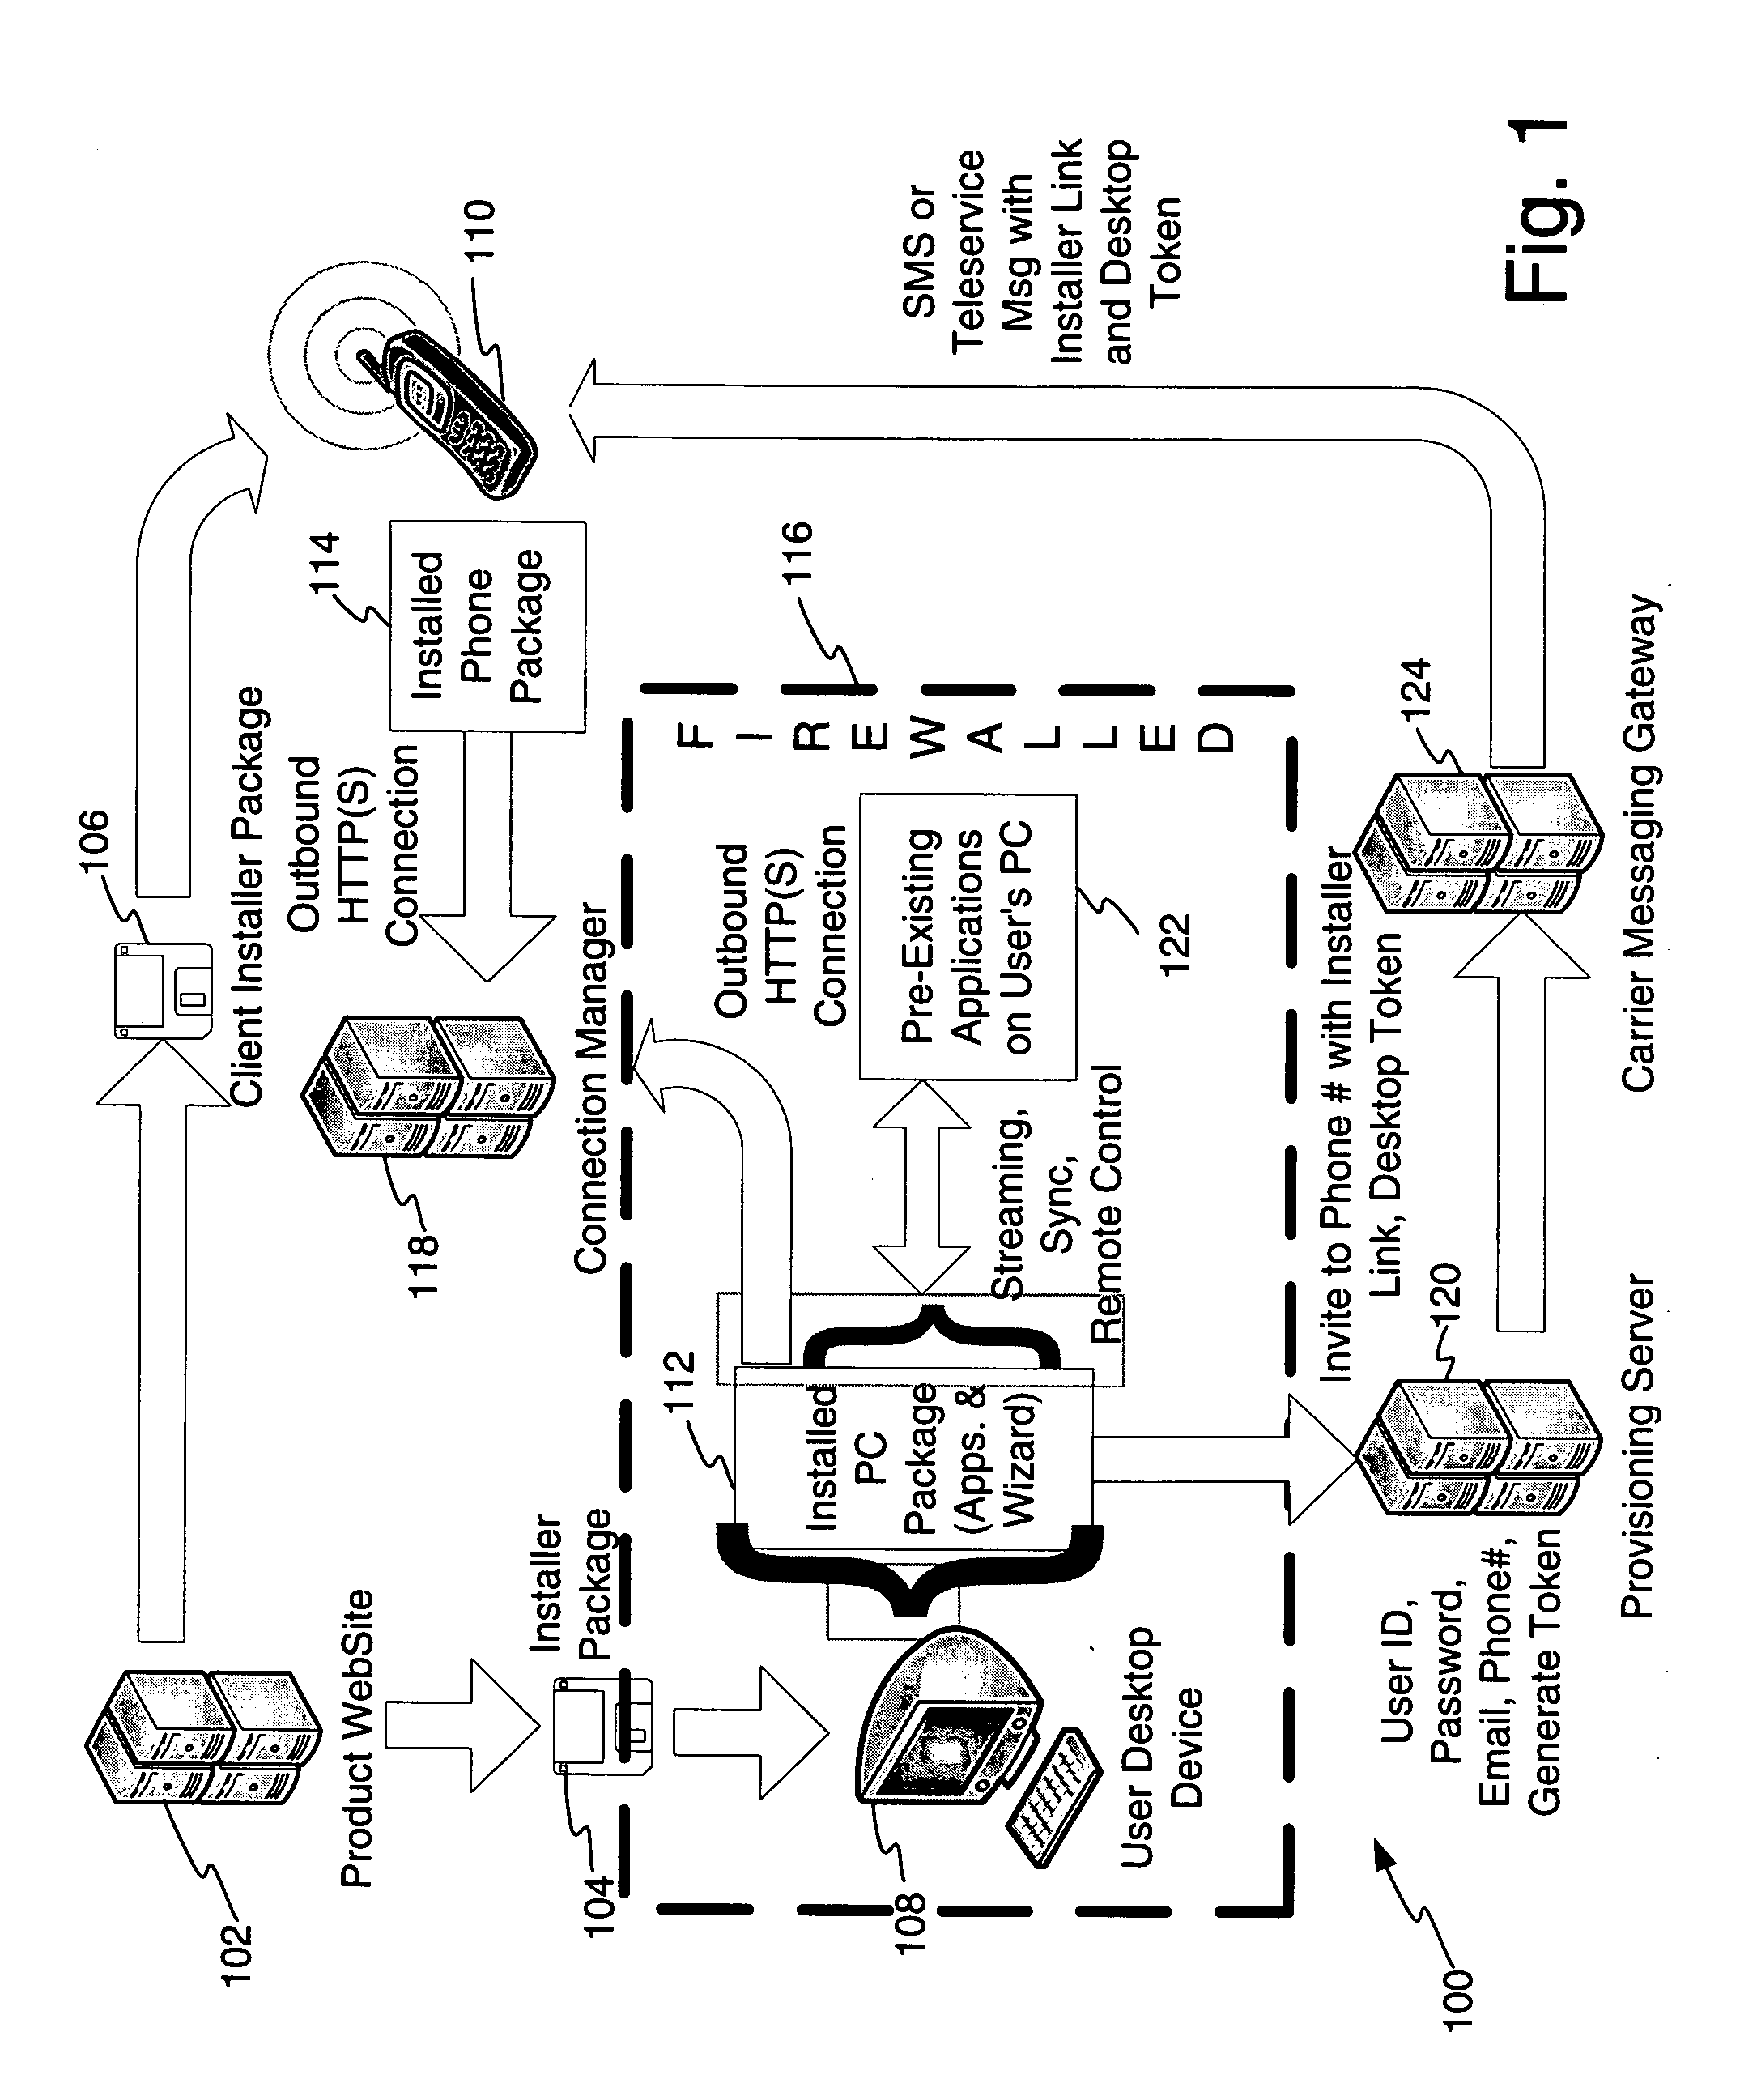 System and method for providing mobile access to personal media